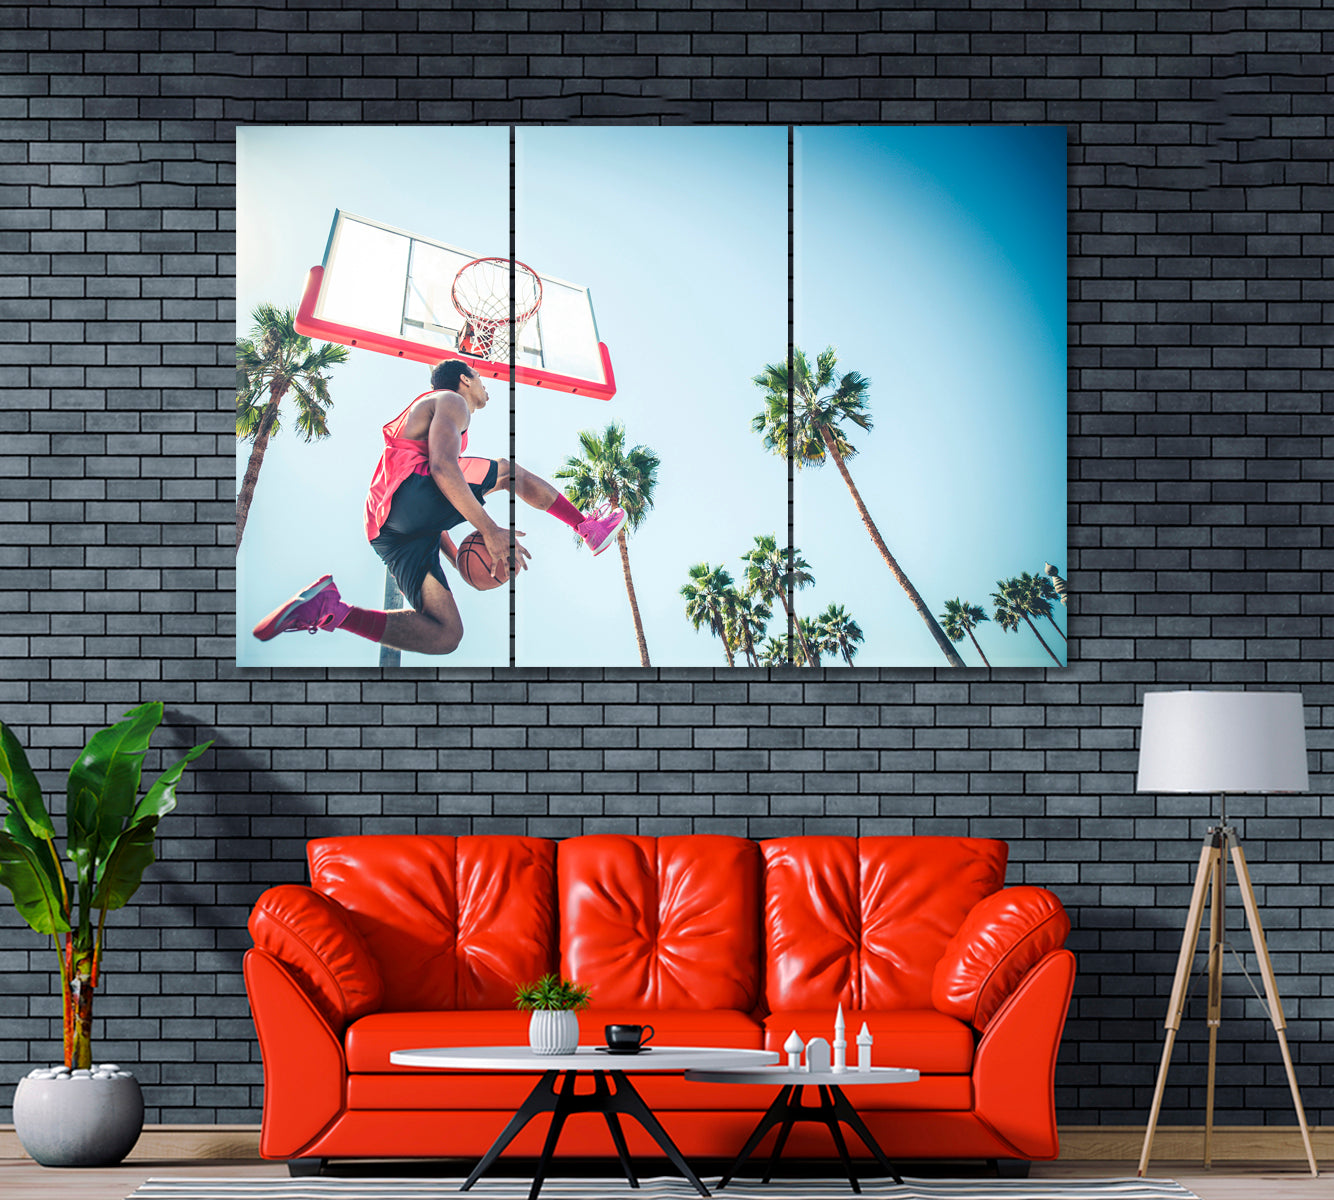 Basketball Player Making a Dunk Canvas Print ArtLexy 3 Panels 36"x24" inches 